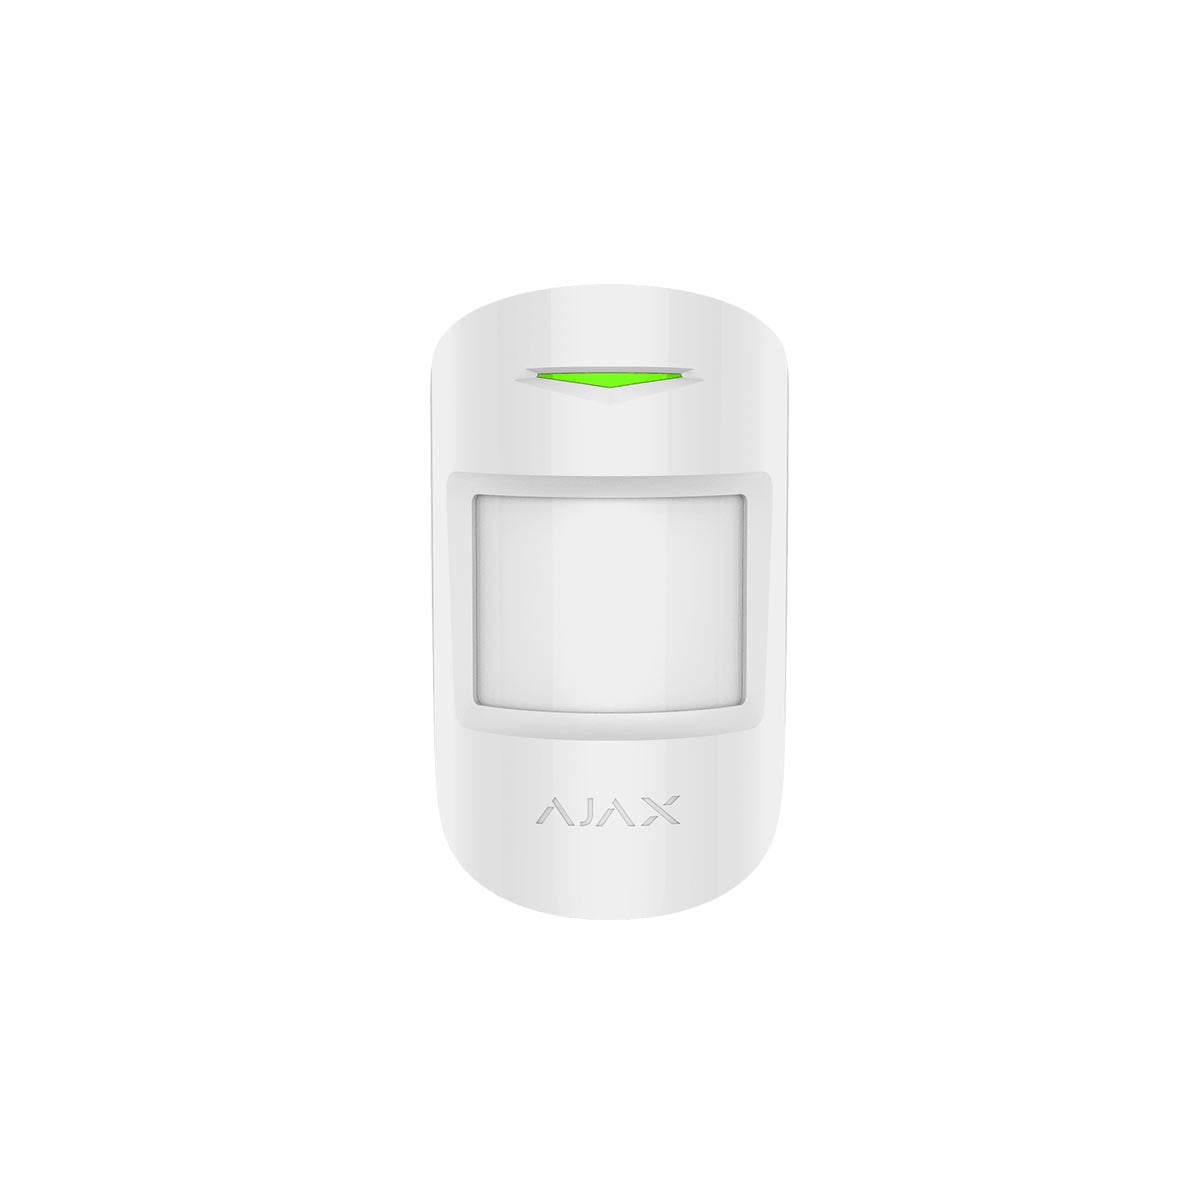 Ajax MotionProtect White Front View BD420W